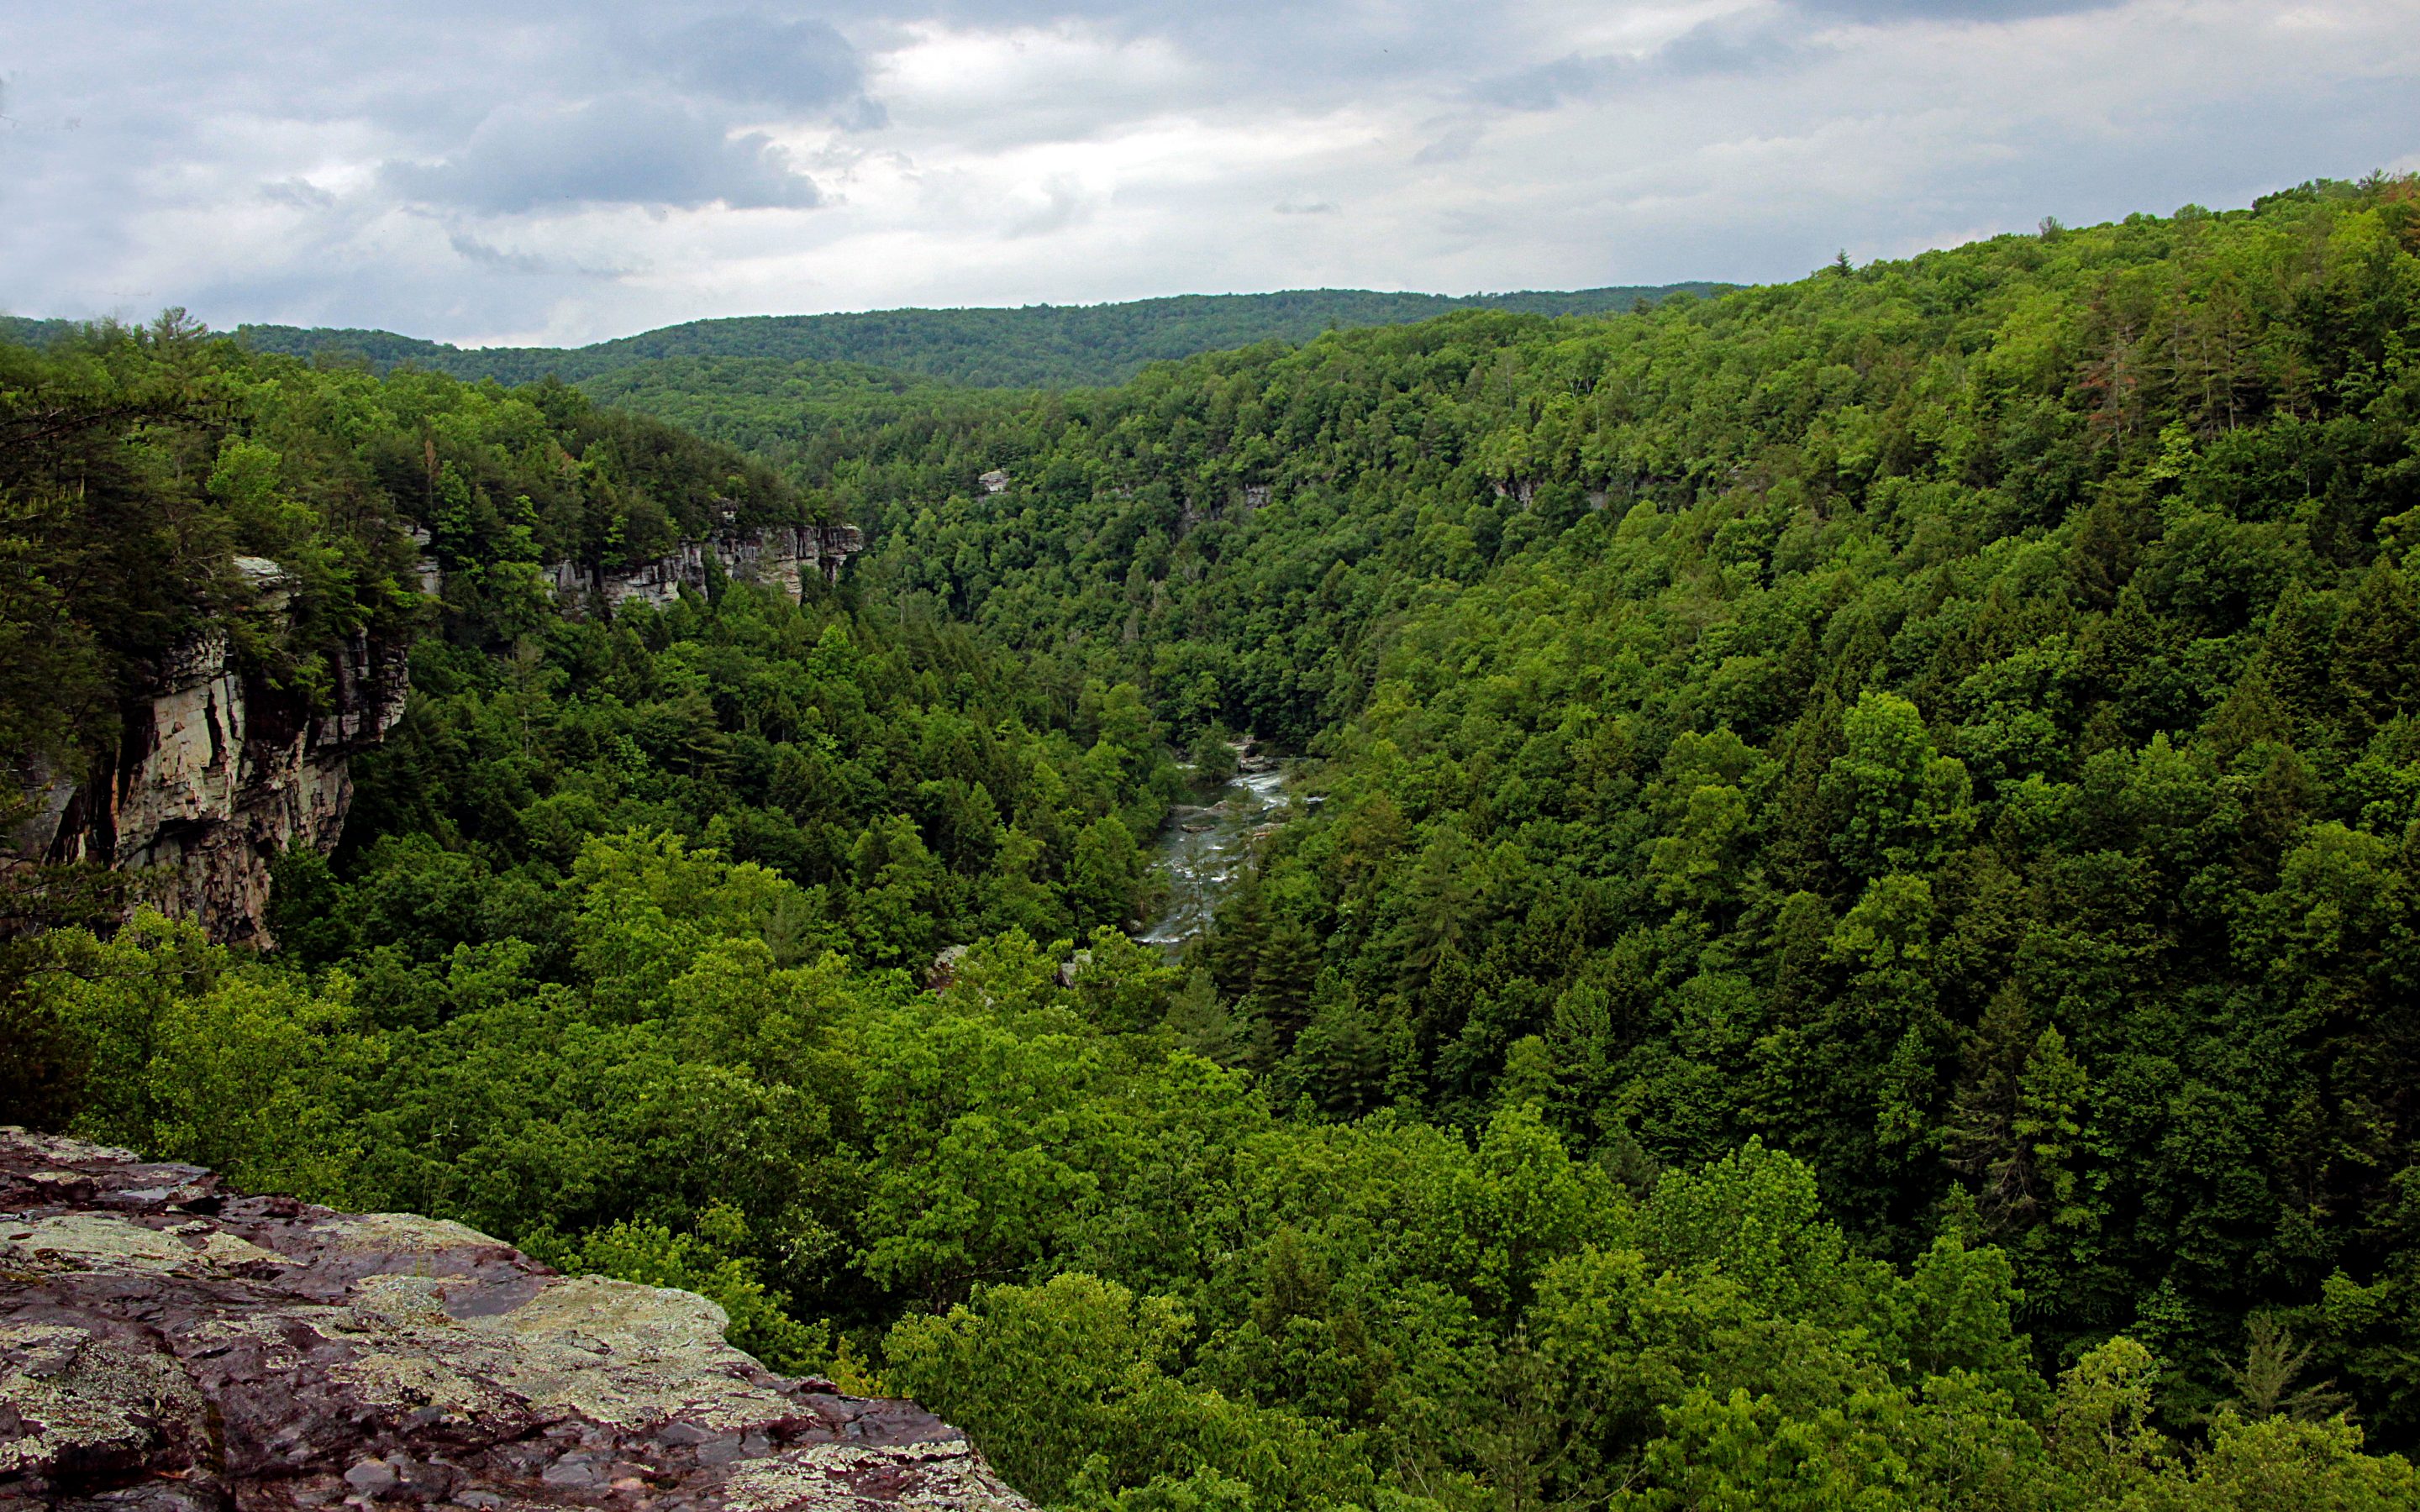 Help Preserve 160 Acres on the Obed Wild & Scenic River